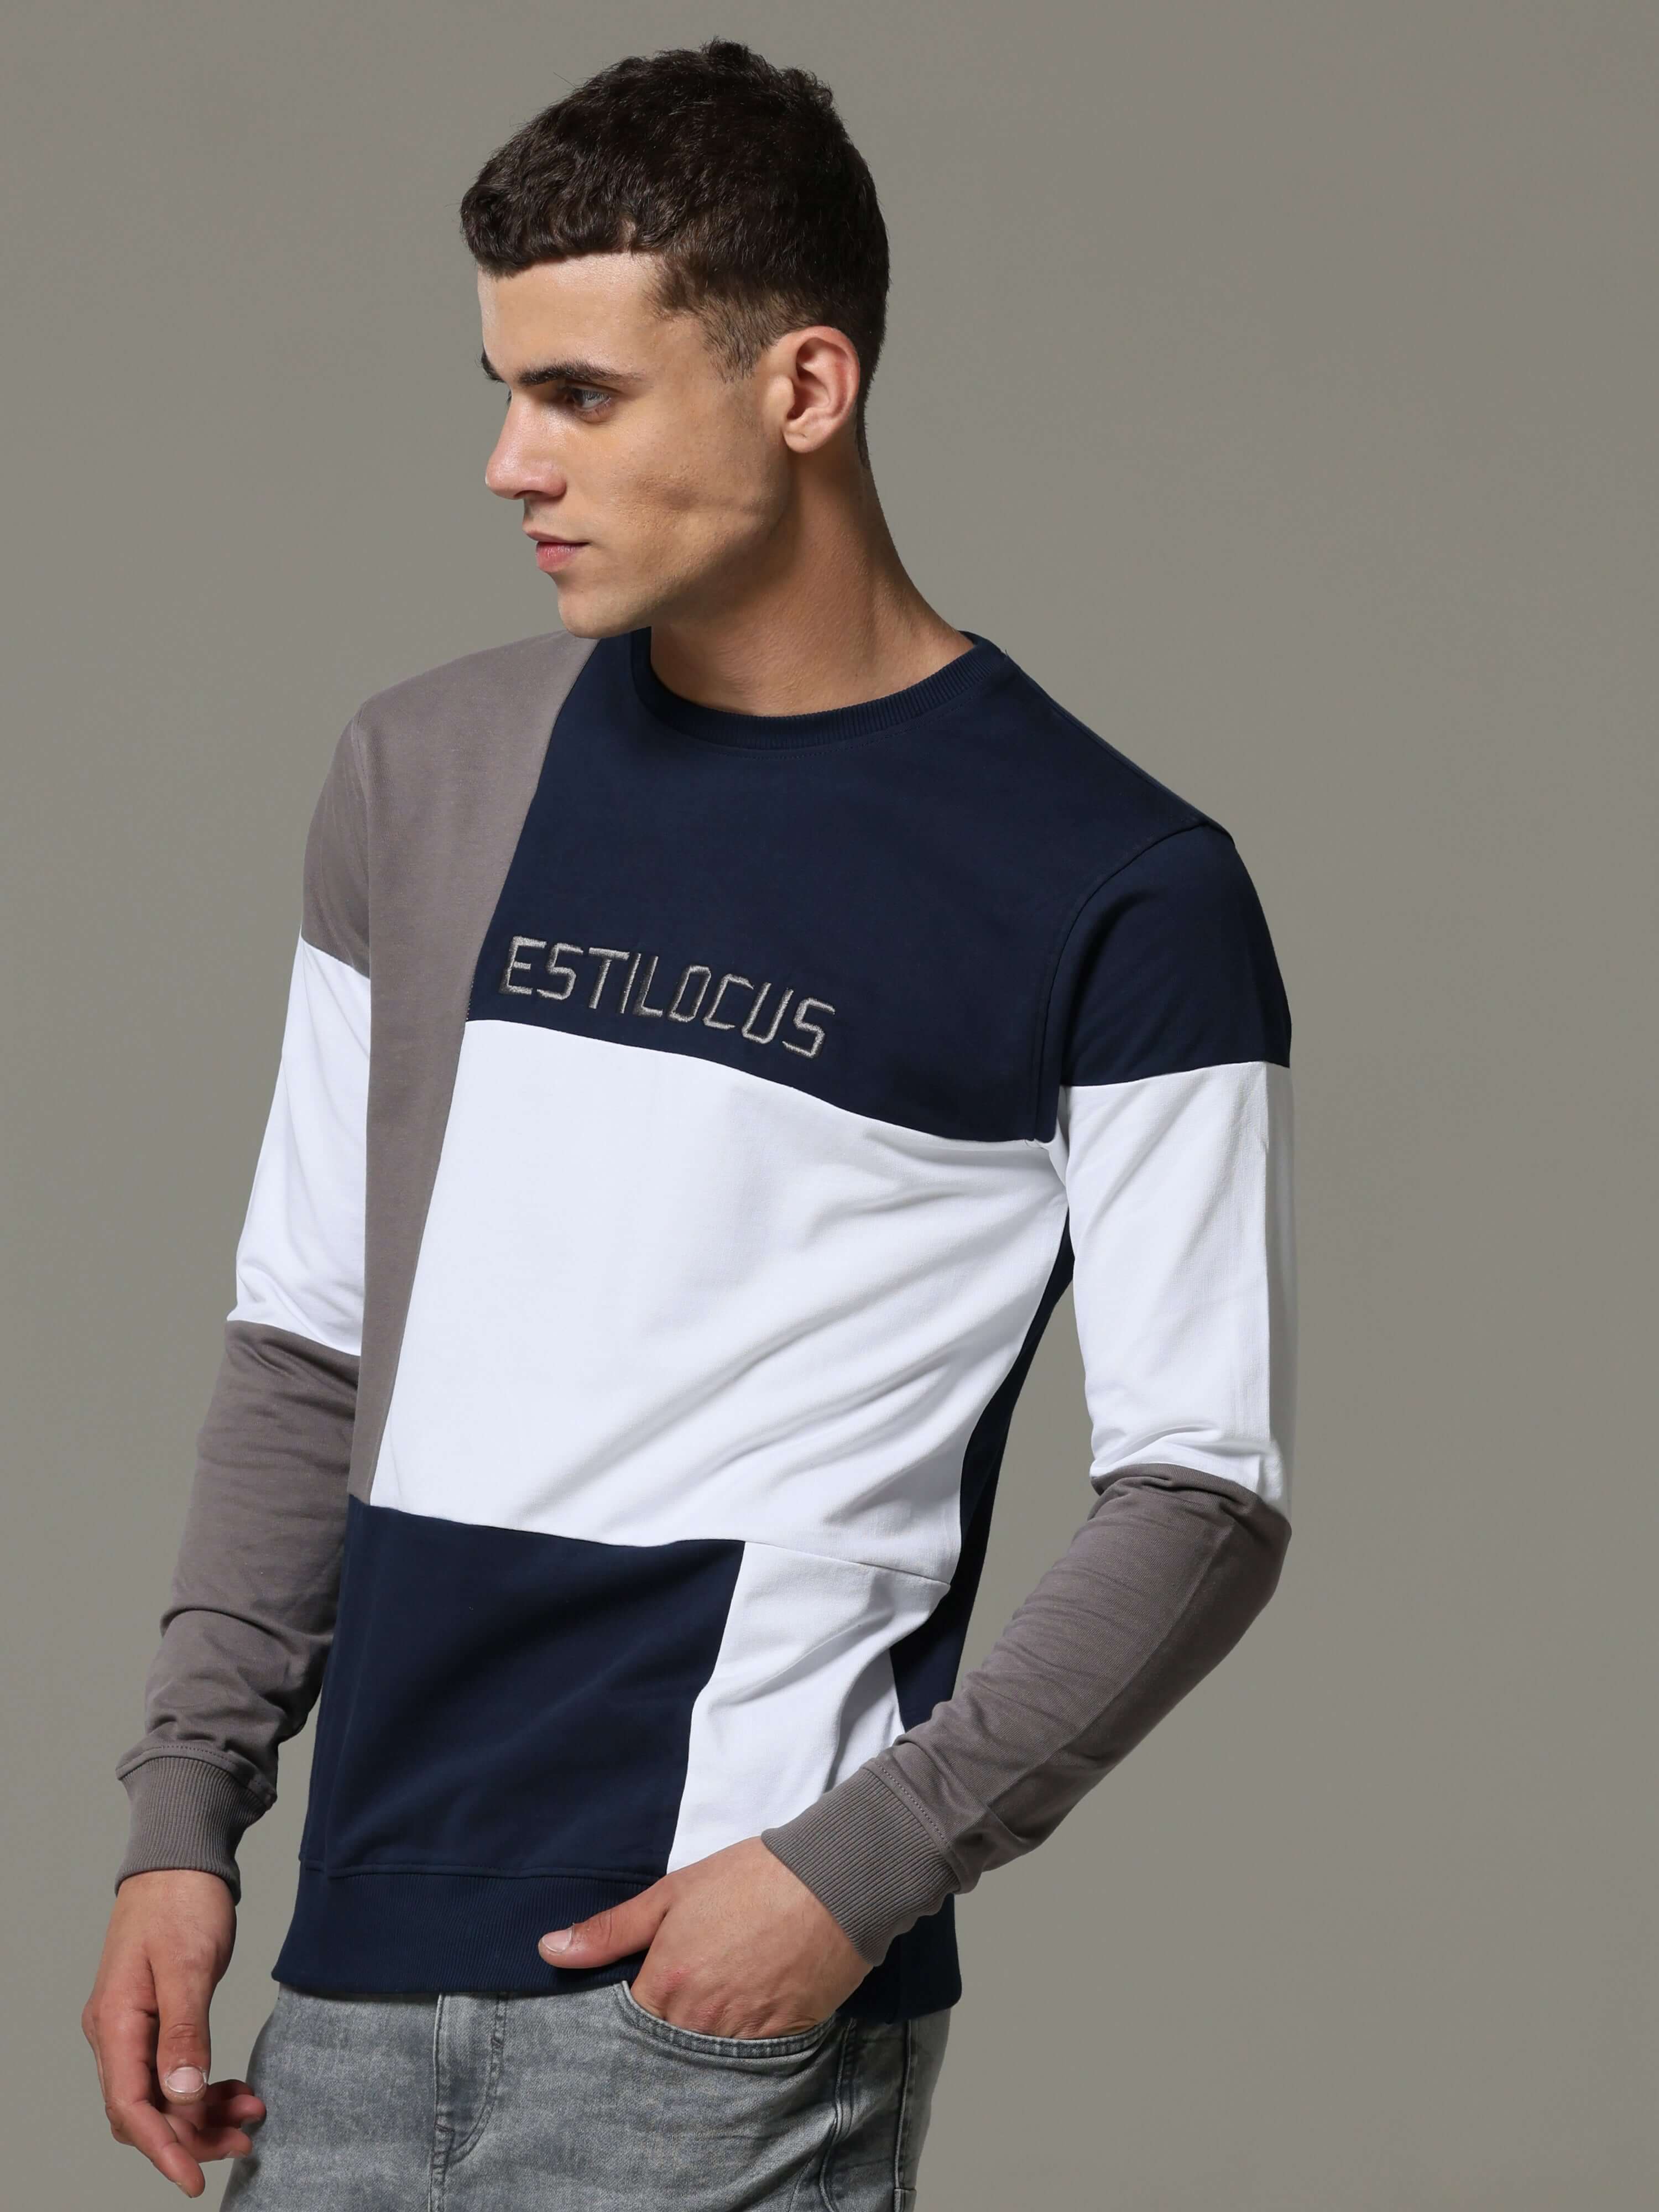 Patterned Crew Neck Blue Sweat Shirt shop online at Estilocus. • Crew neck• Long sleeve• Ribbing around neckline, cuff & hem•Contrasting patch work Fit : Comfort fit Size : The model is wearing M size Model height : 6 Feet Wash care : Cold machine wash